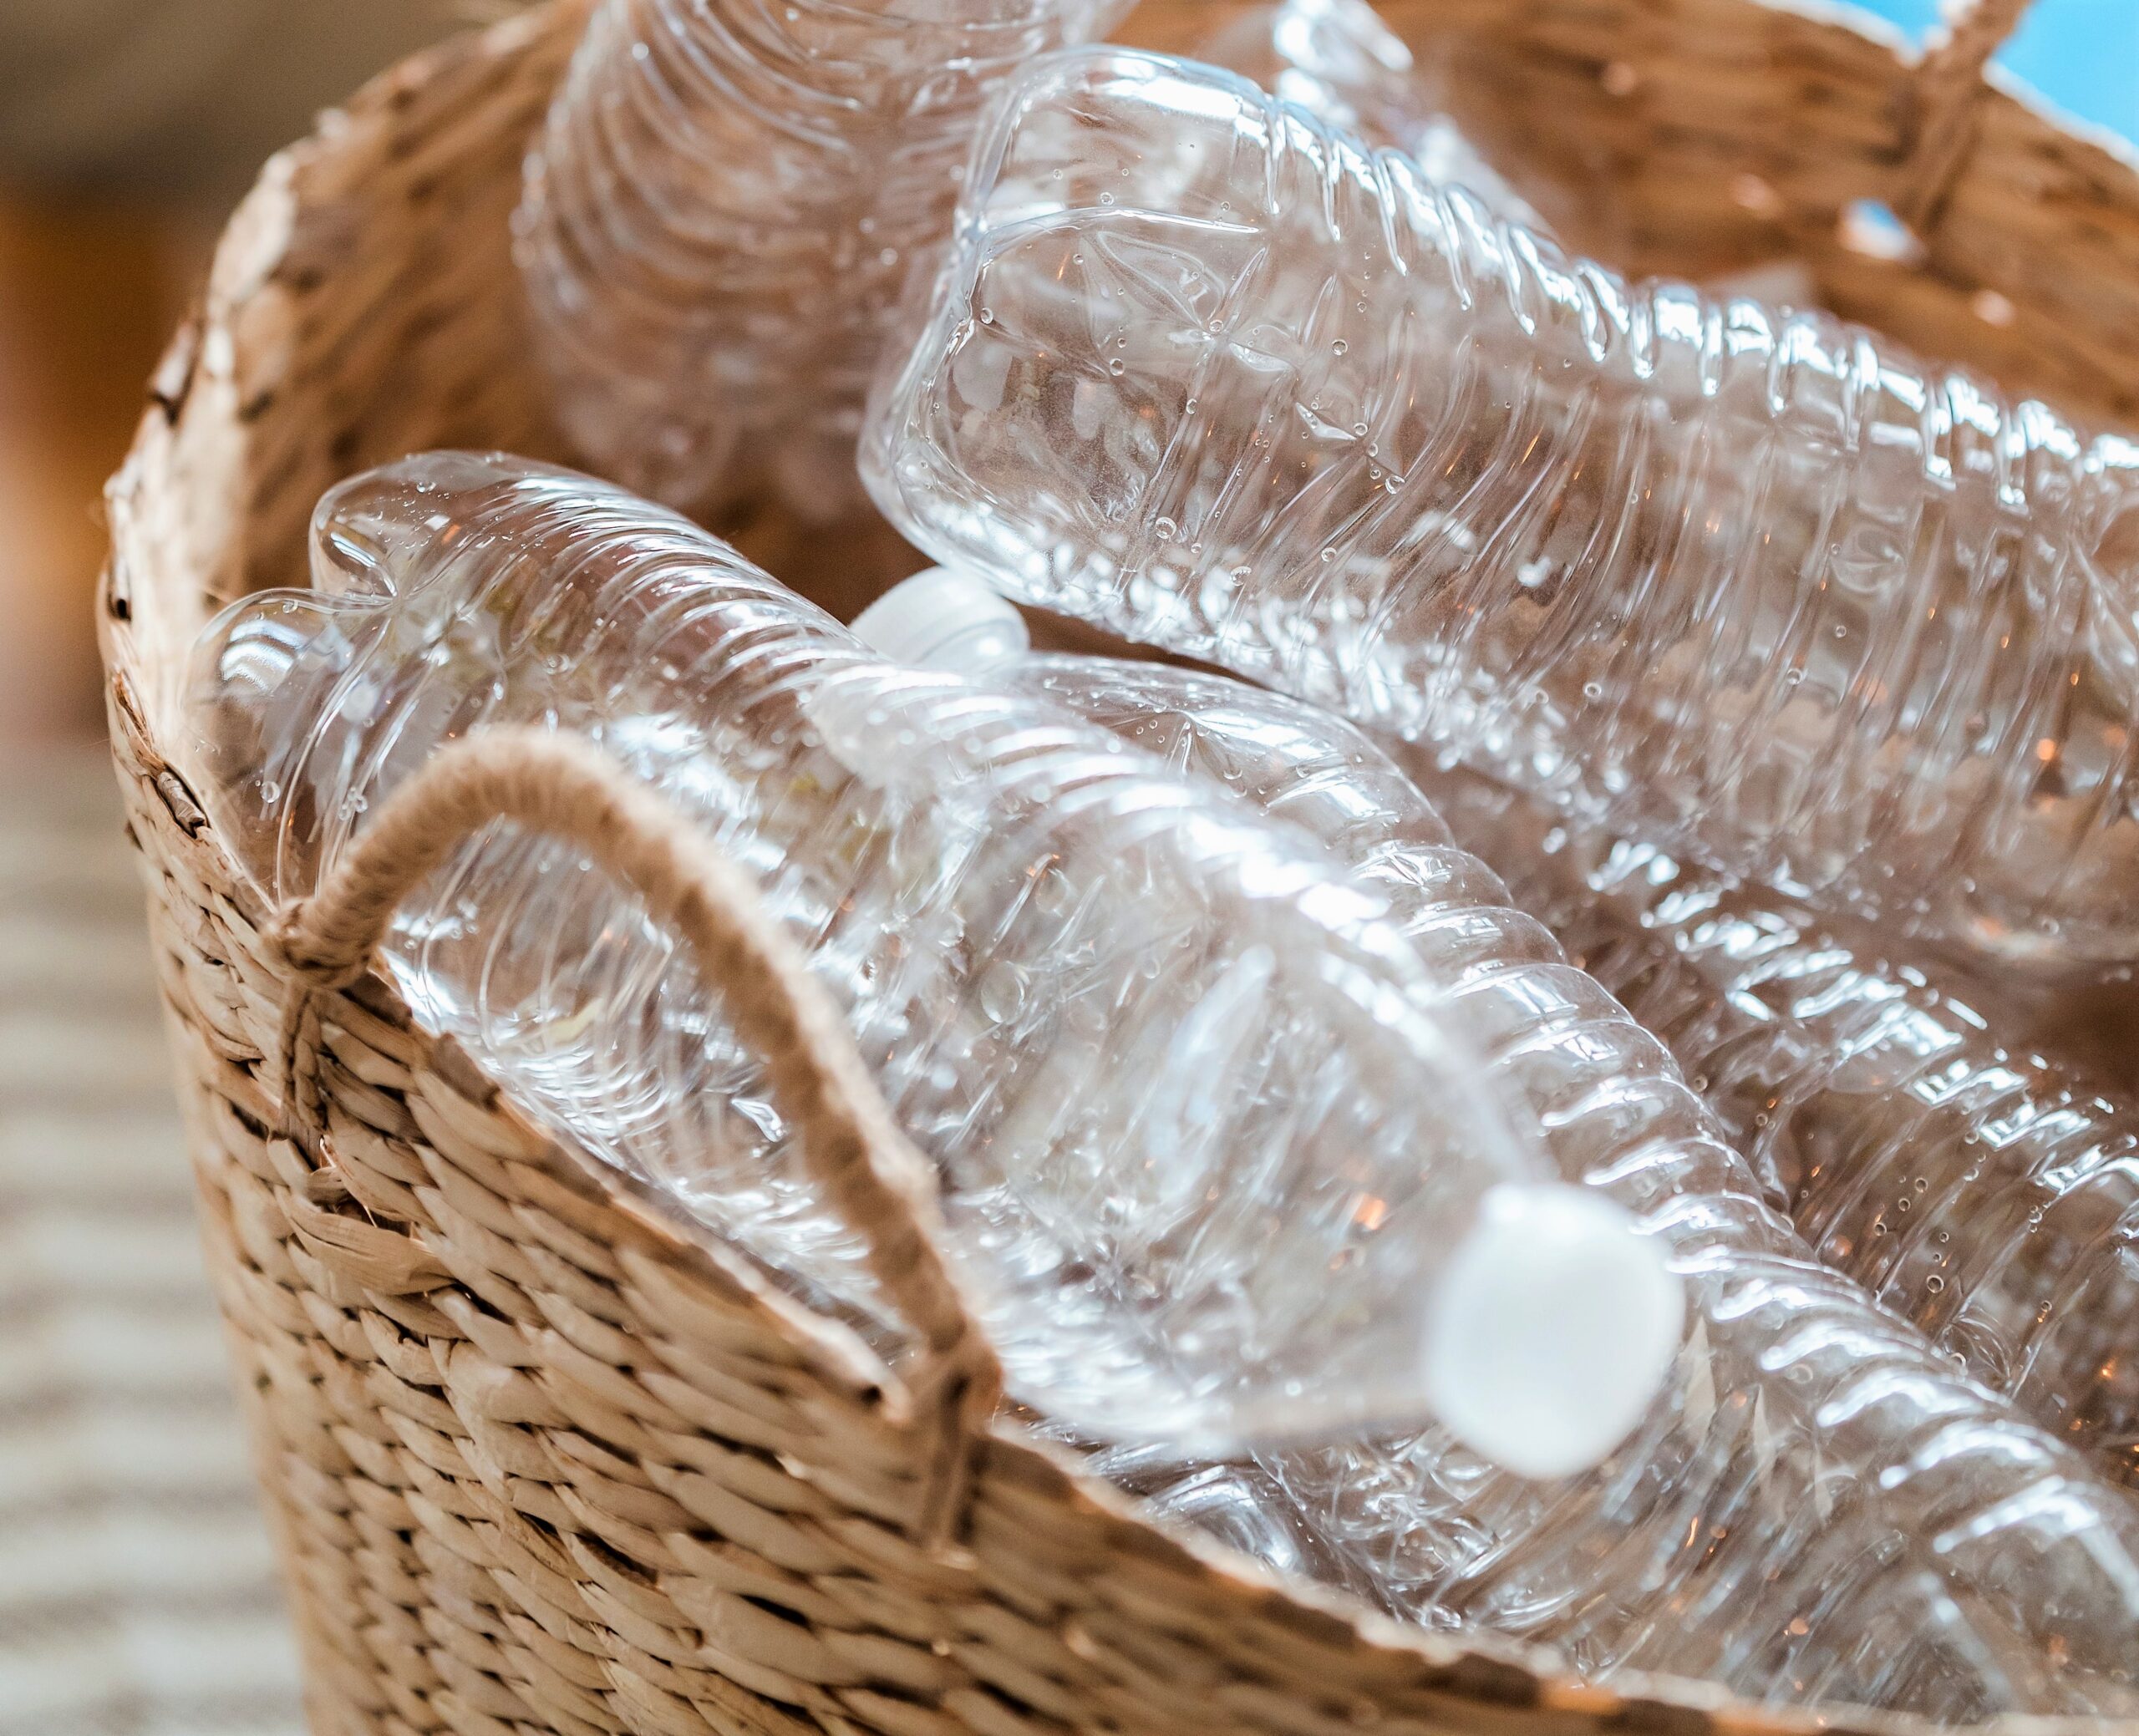 A nice wicker basket is overfilled with empty plastic water bottles.